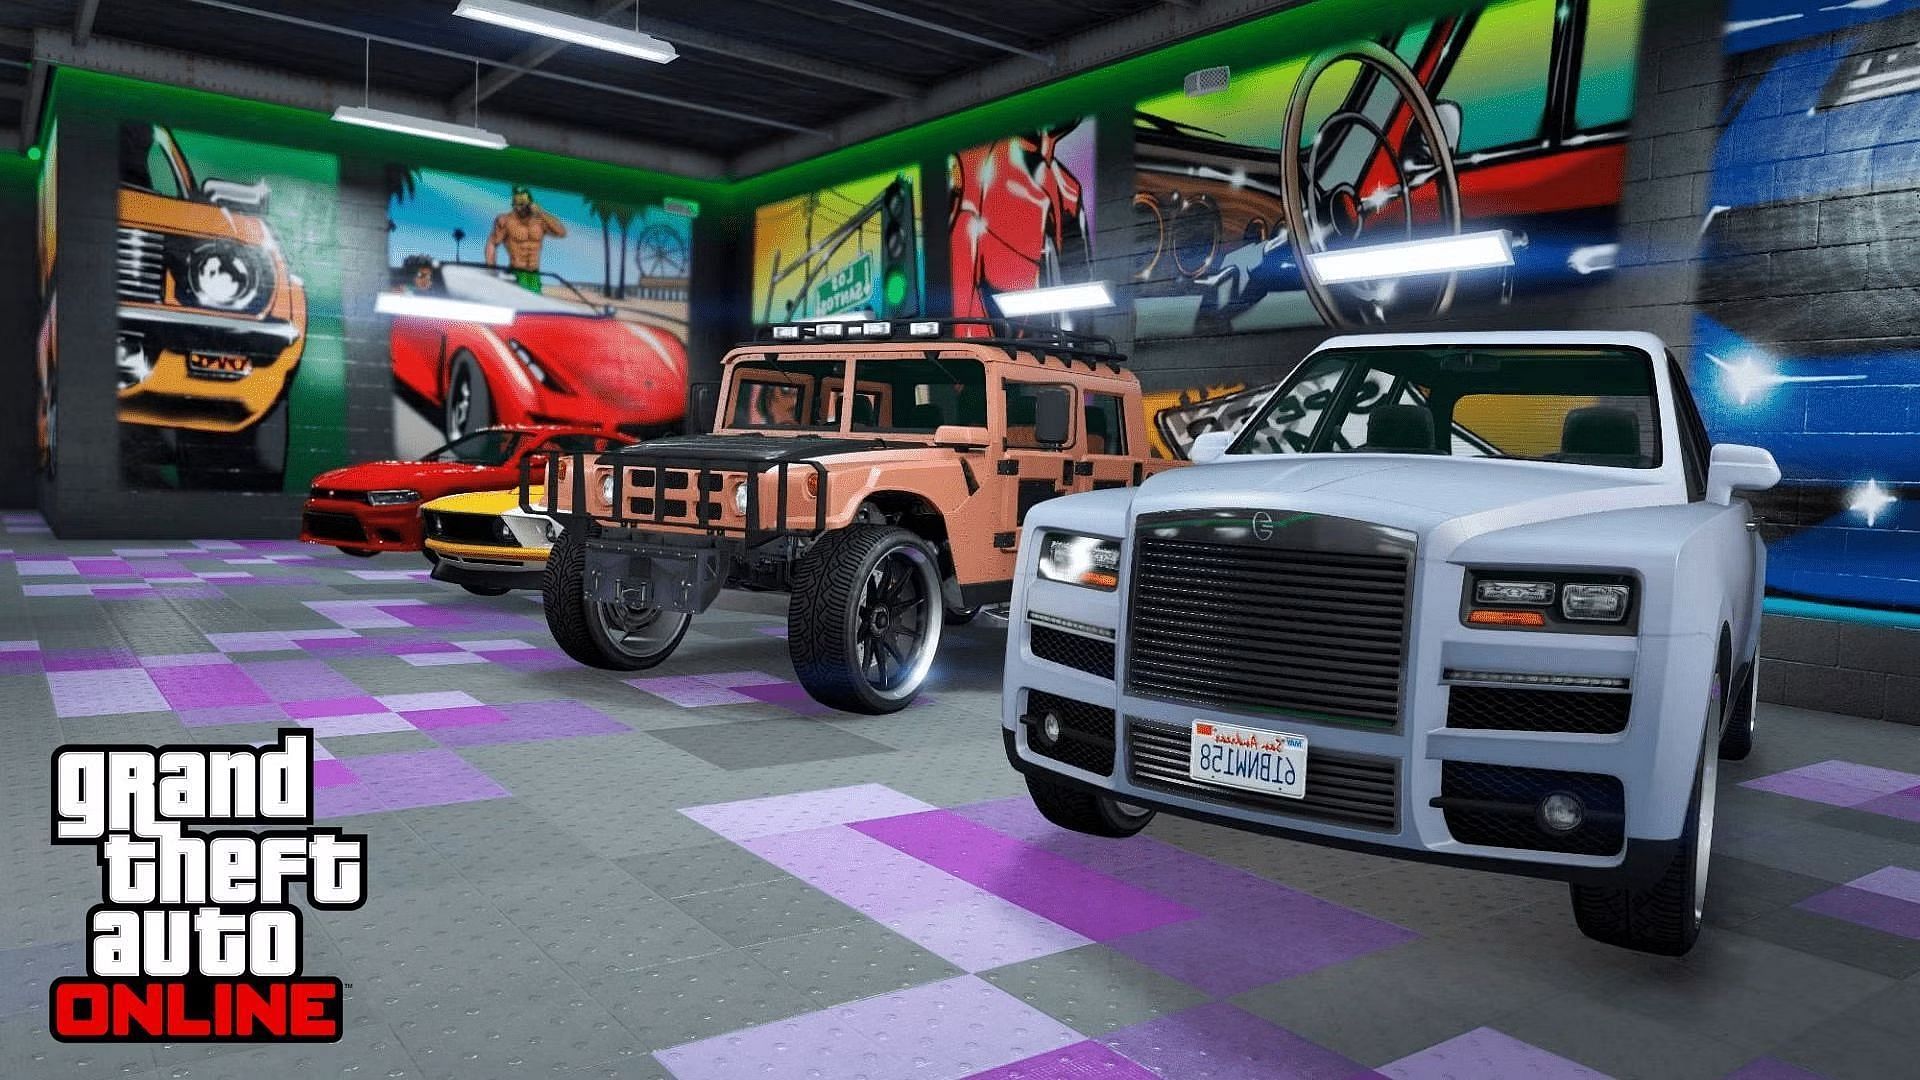 A brief about the ongoing GTA Online Auto Shop bonuses in GTA Online this week by Rockstar Games (Image via Rockstar Games)